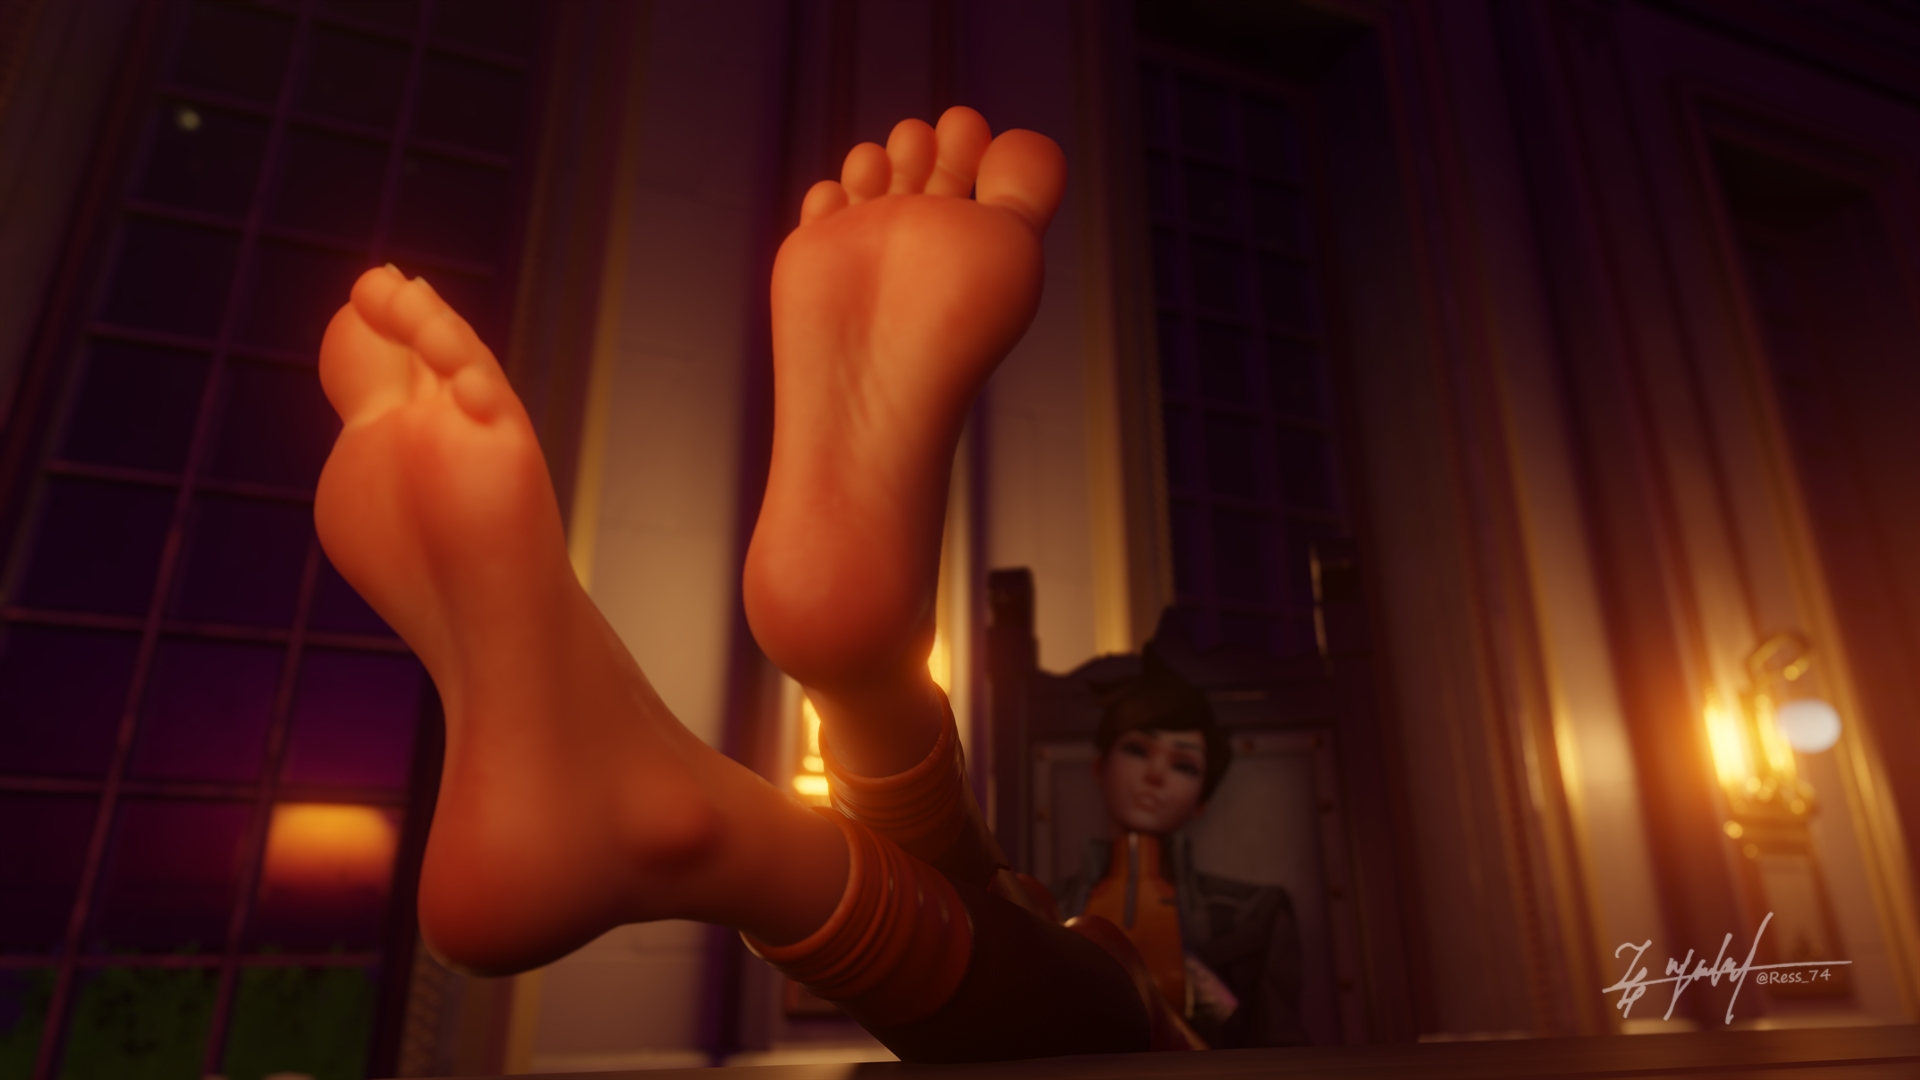 Here come some smelly feet Tracer Overwatch Overwatch 2 Feet Socks 2